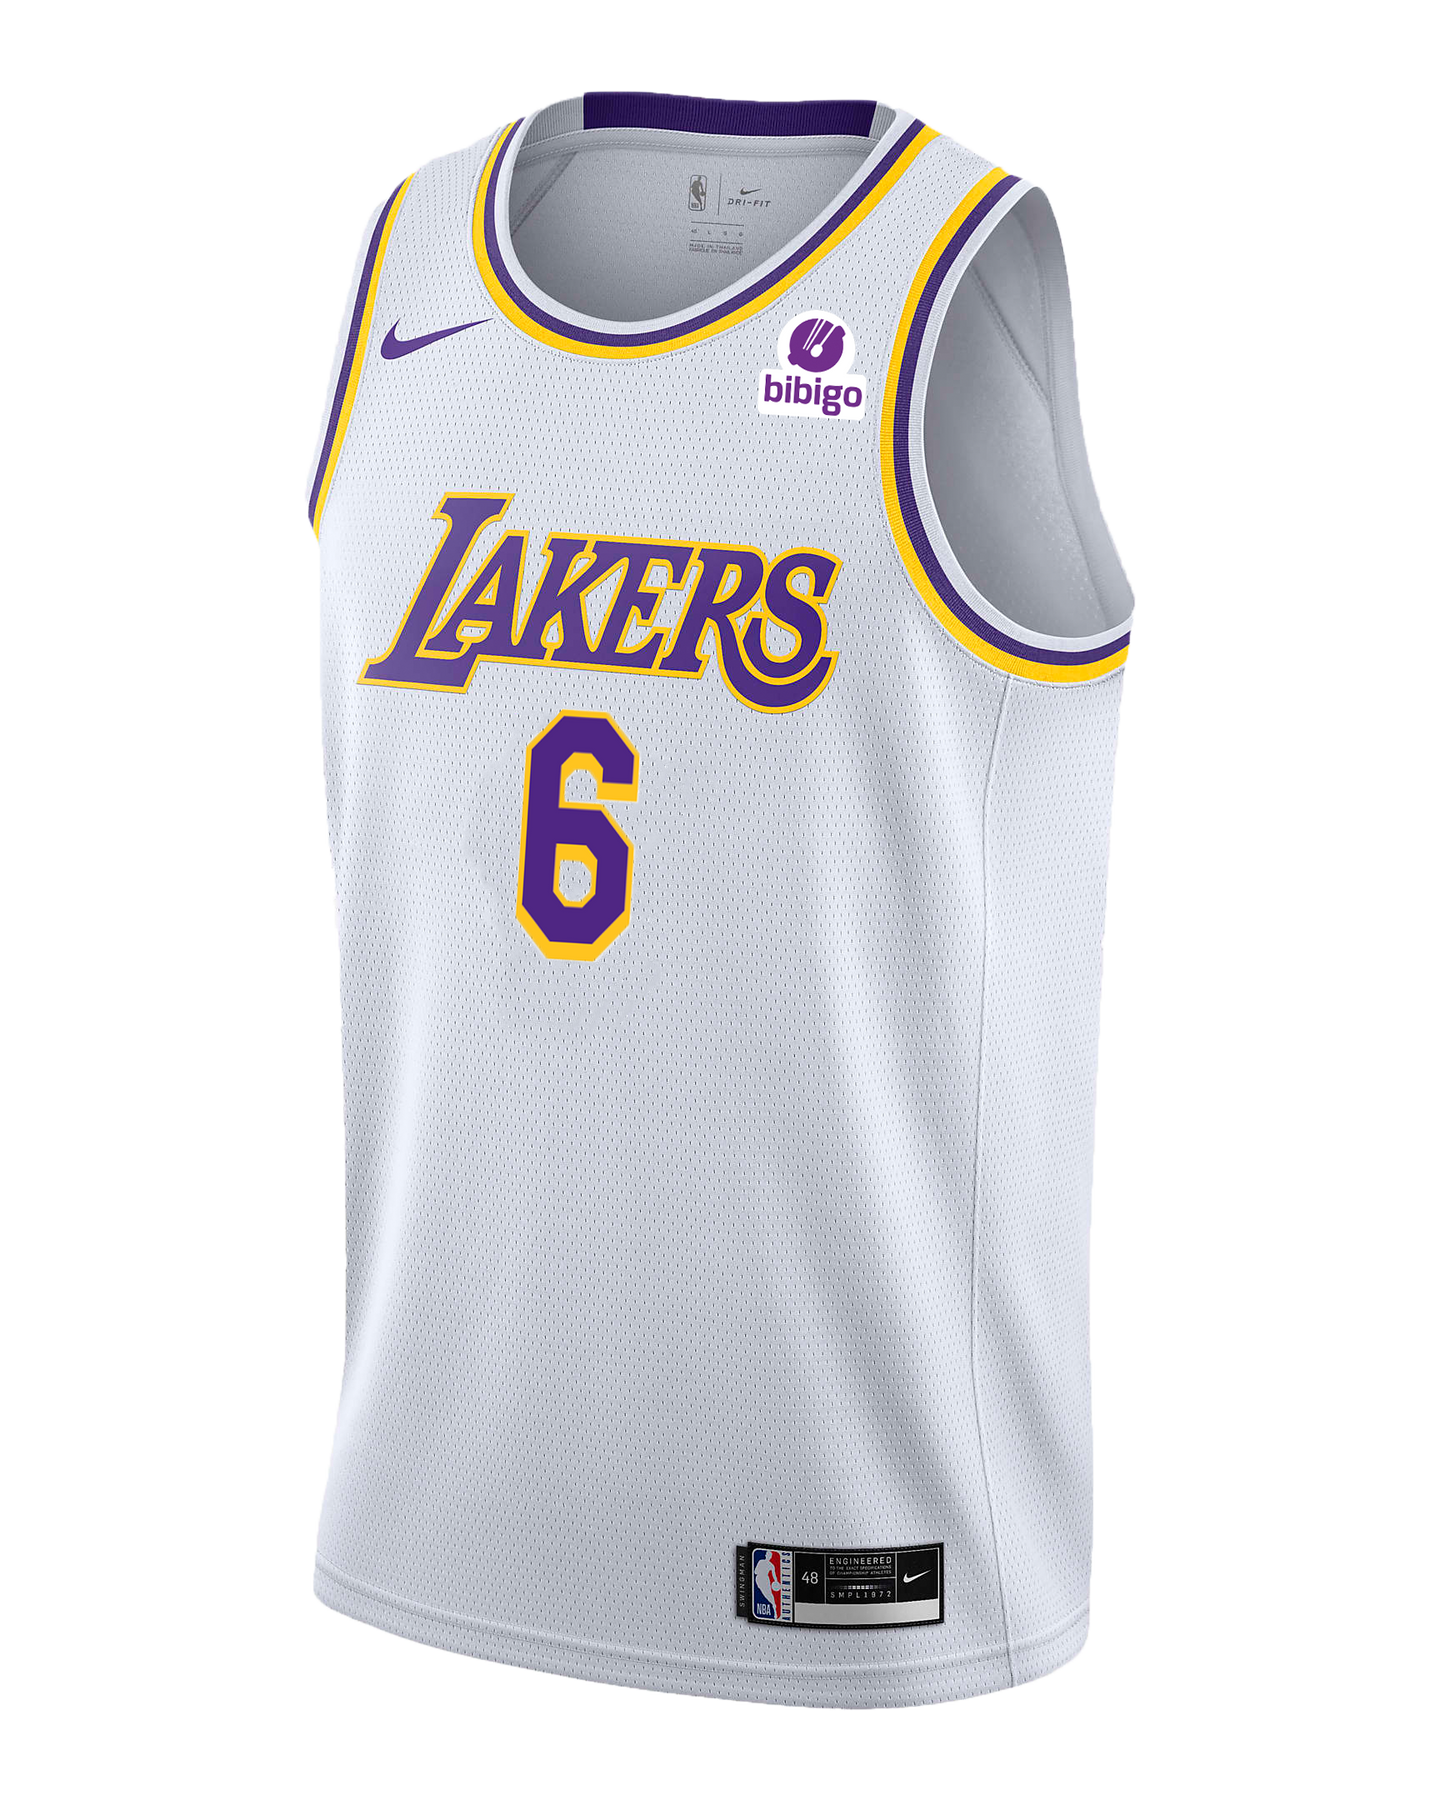 lakers different jerseys